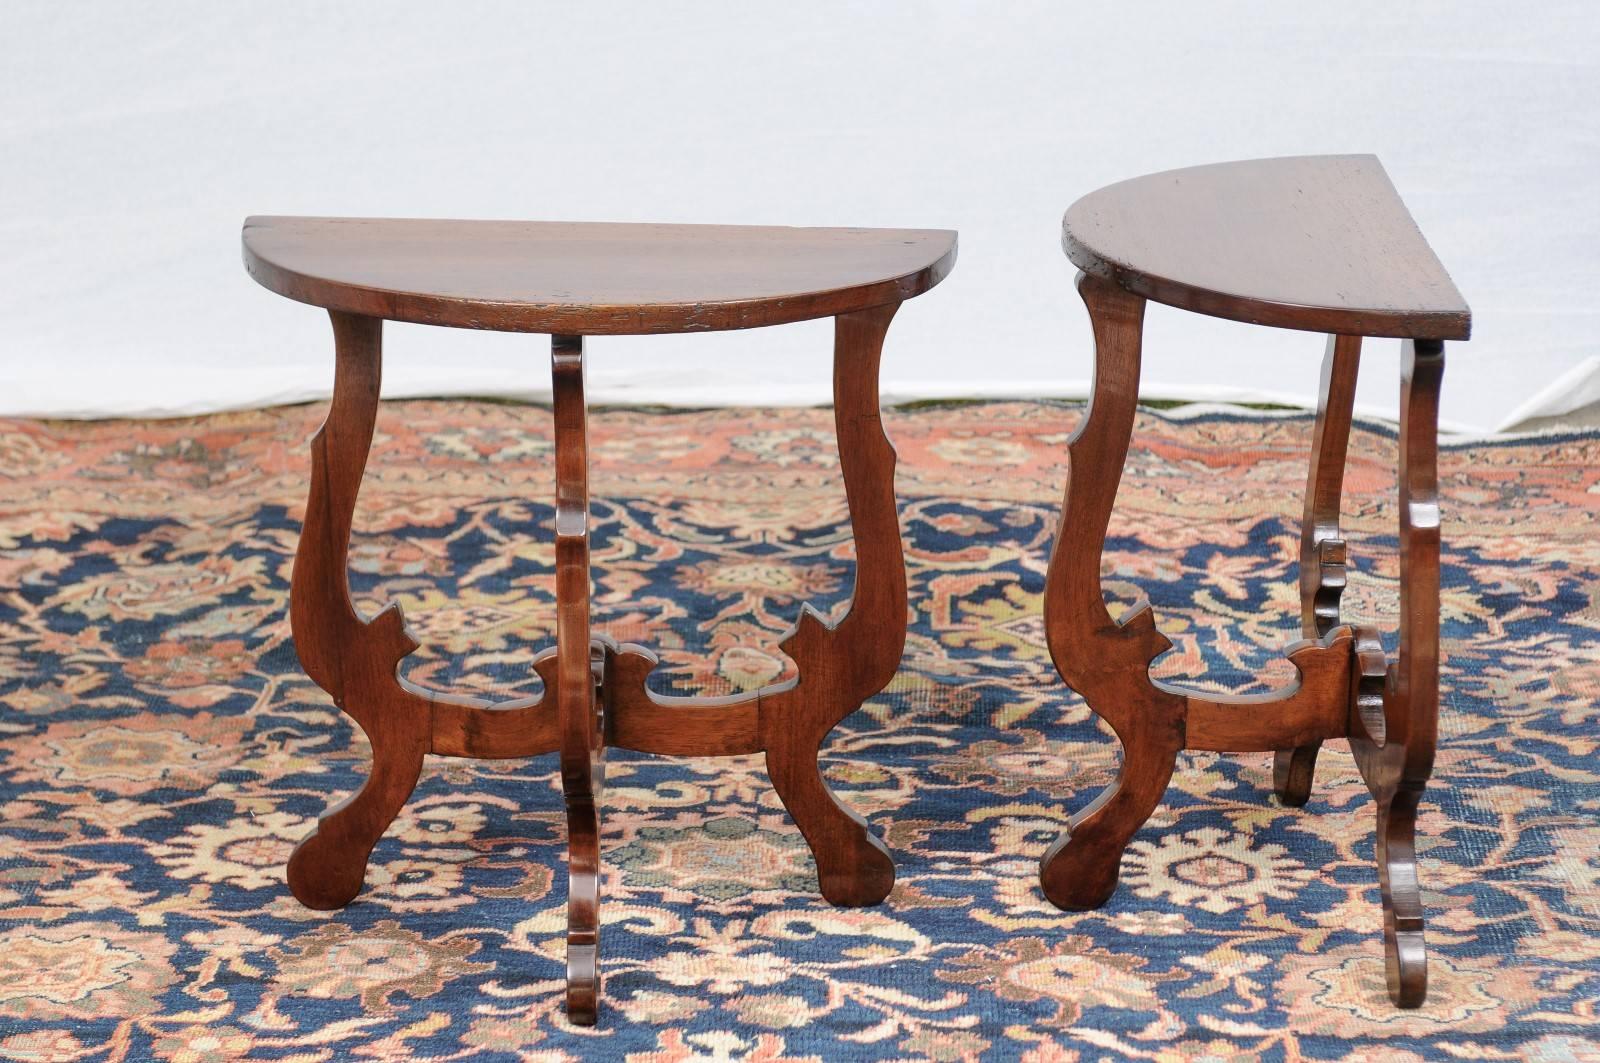 Wood Pair of Petite Italian Baroque Style Demilune Tables with Lyre Legs, circa 1870